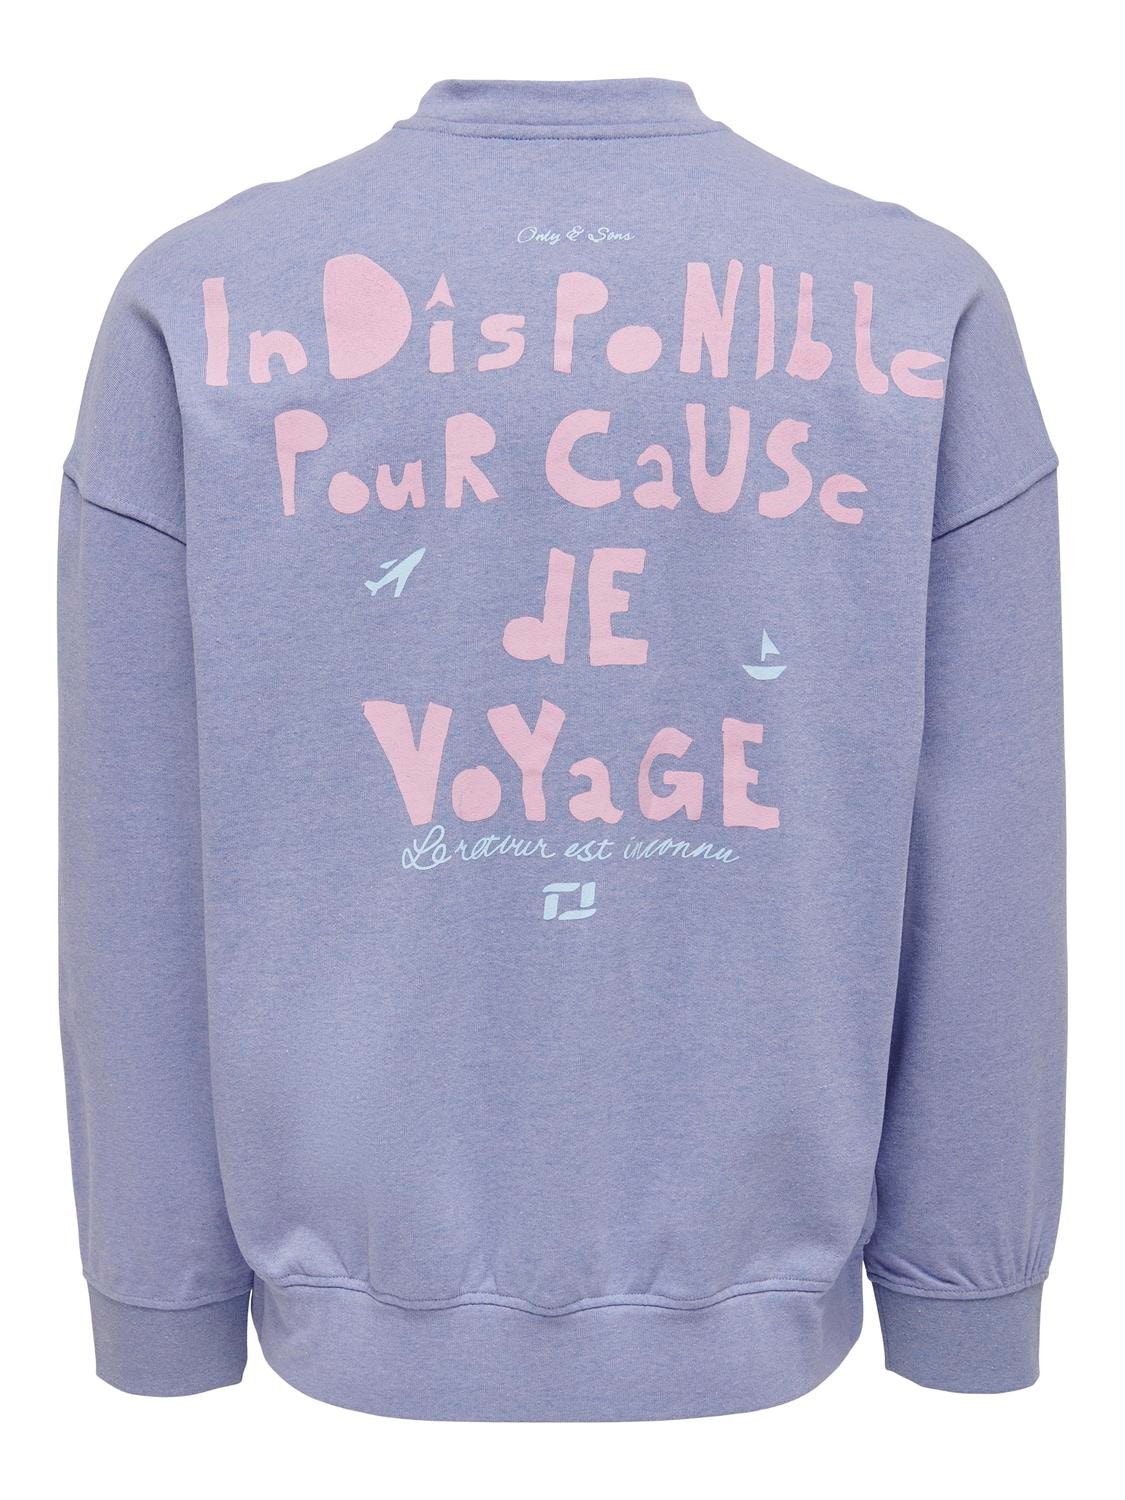 Sweat-shirt Relaxed Fit Col ras du cou Manches longues Gris Clair